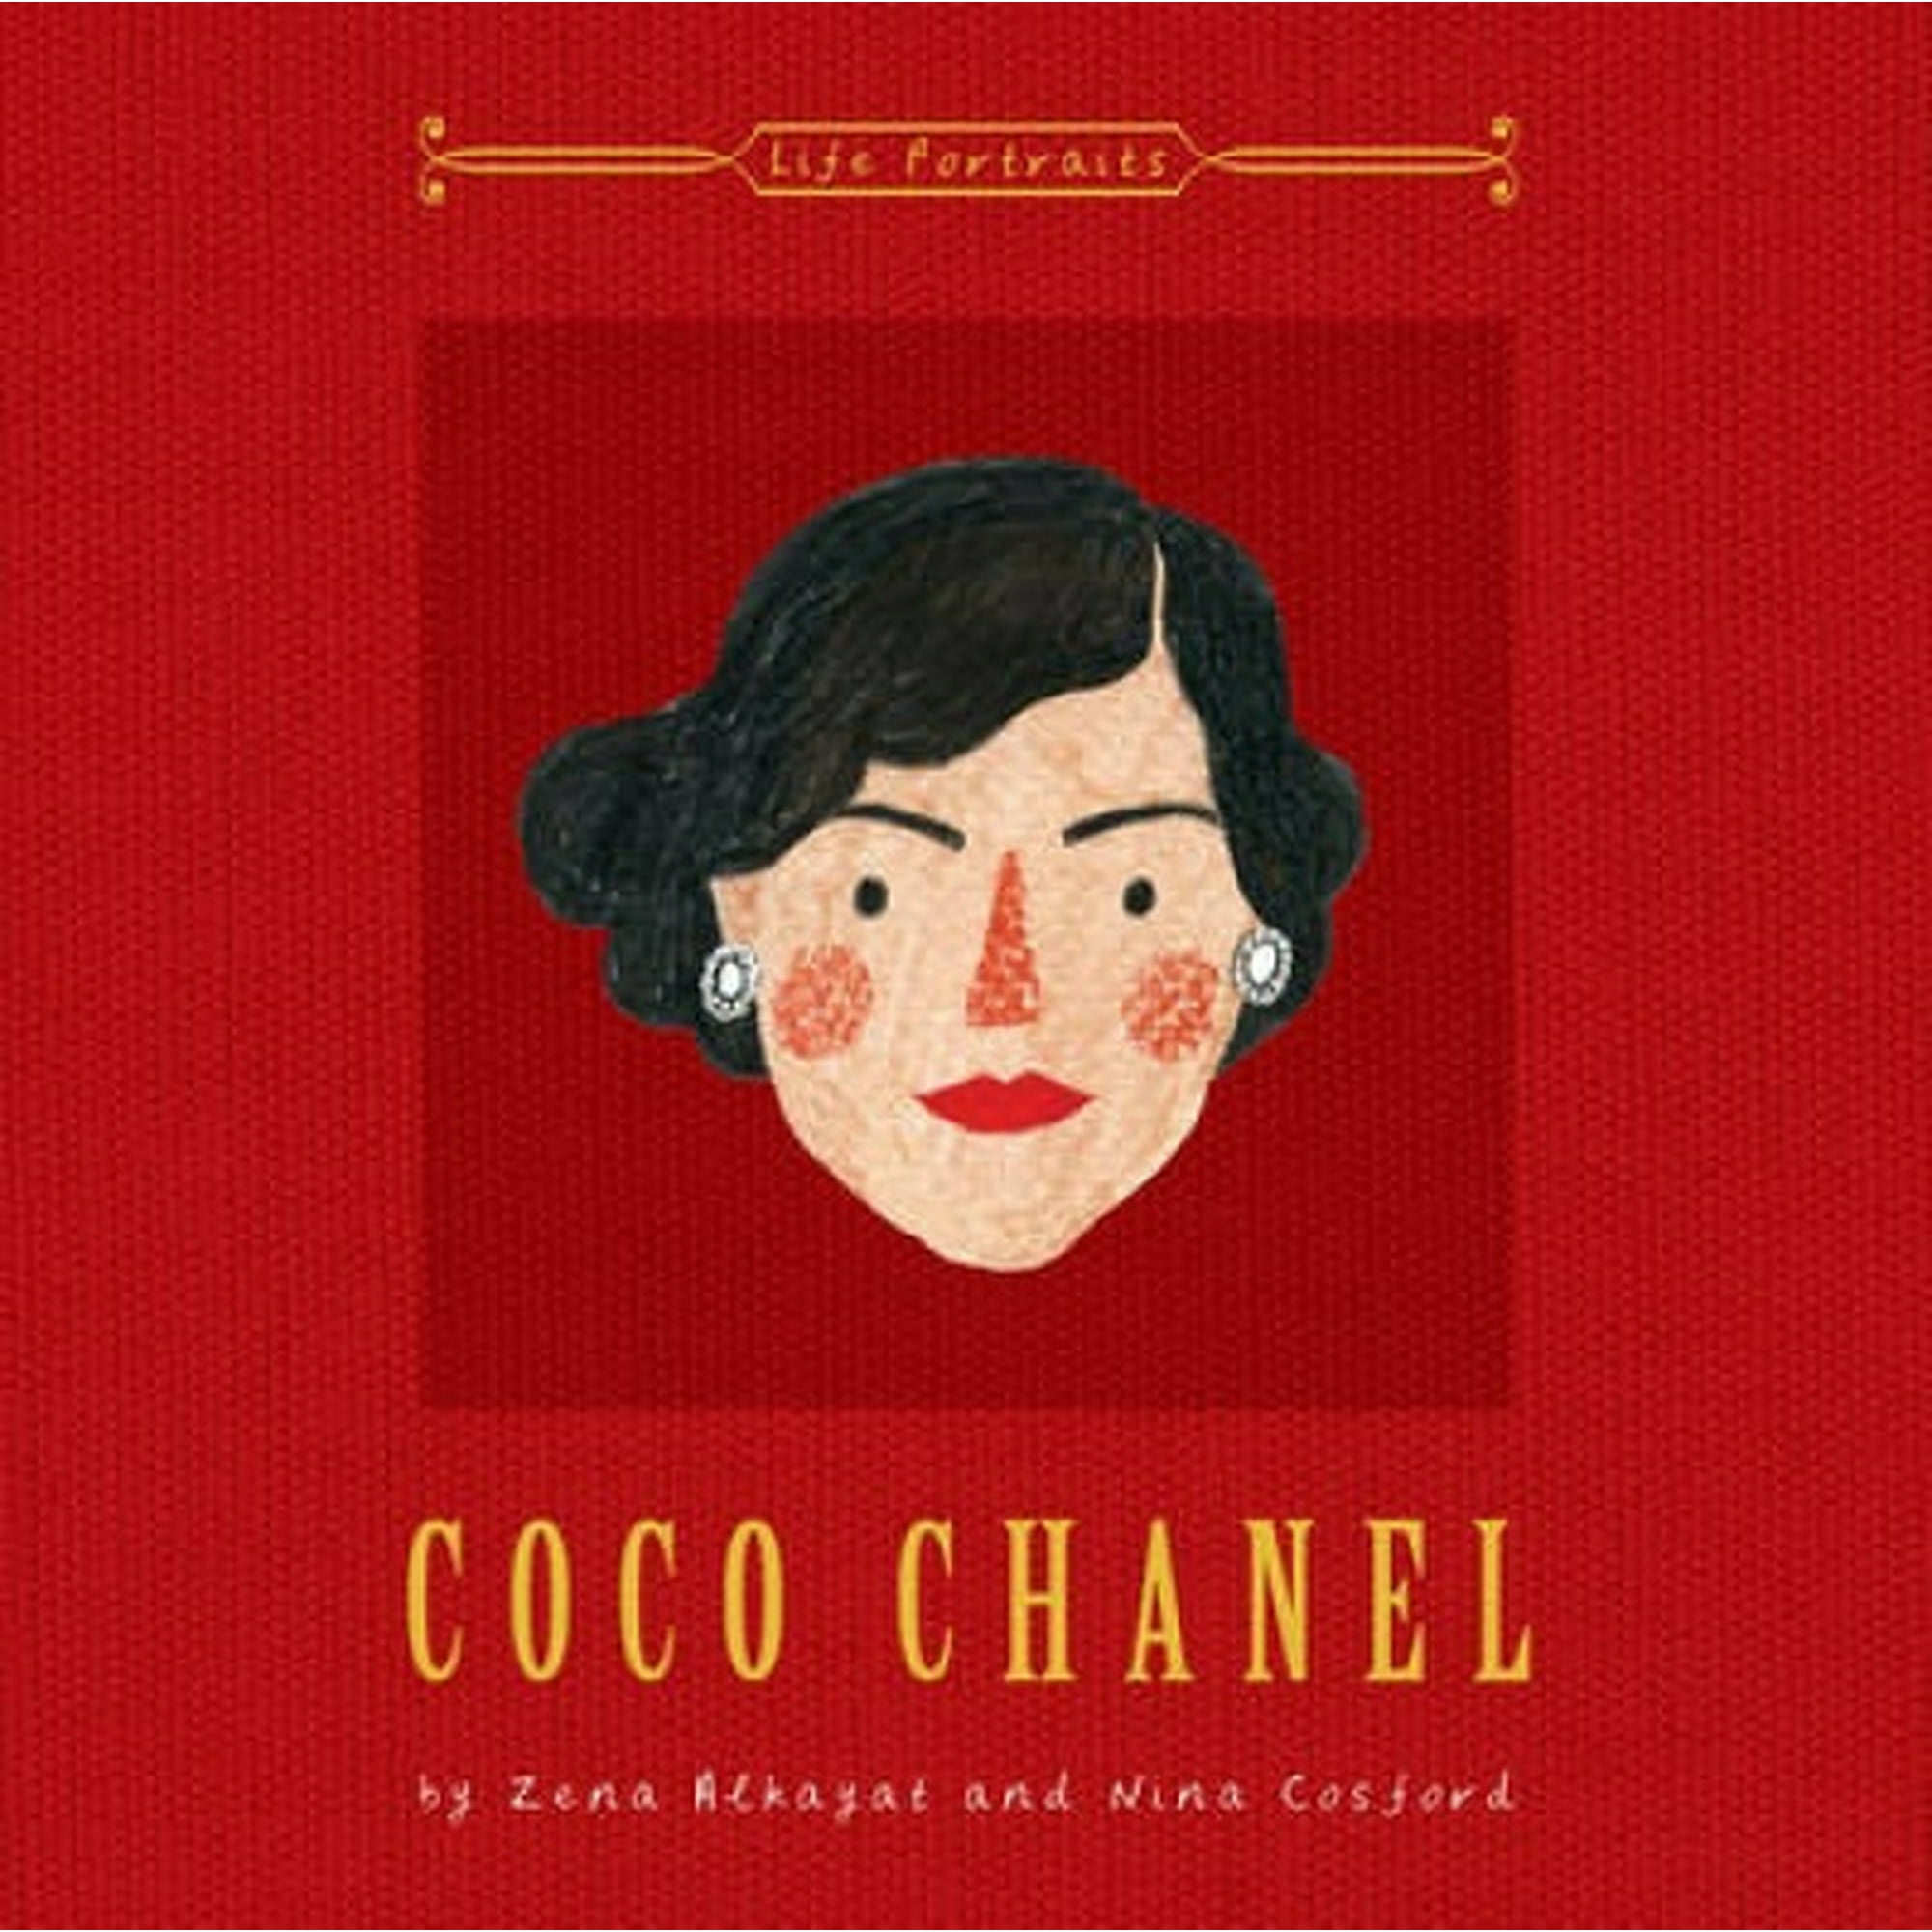 Coco Chanel: Biography, Family, Education - Javatpoint